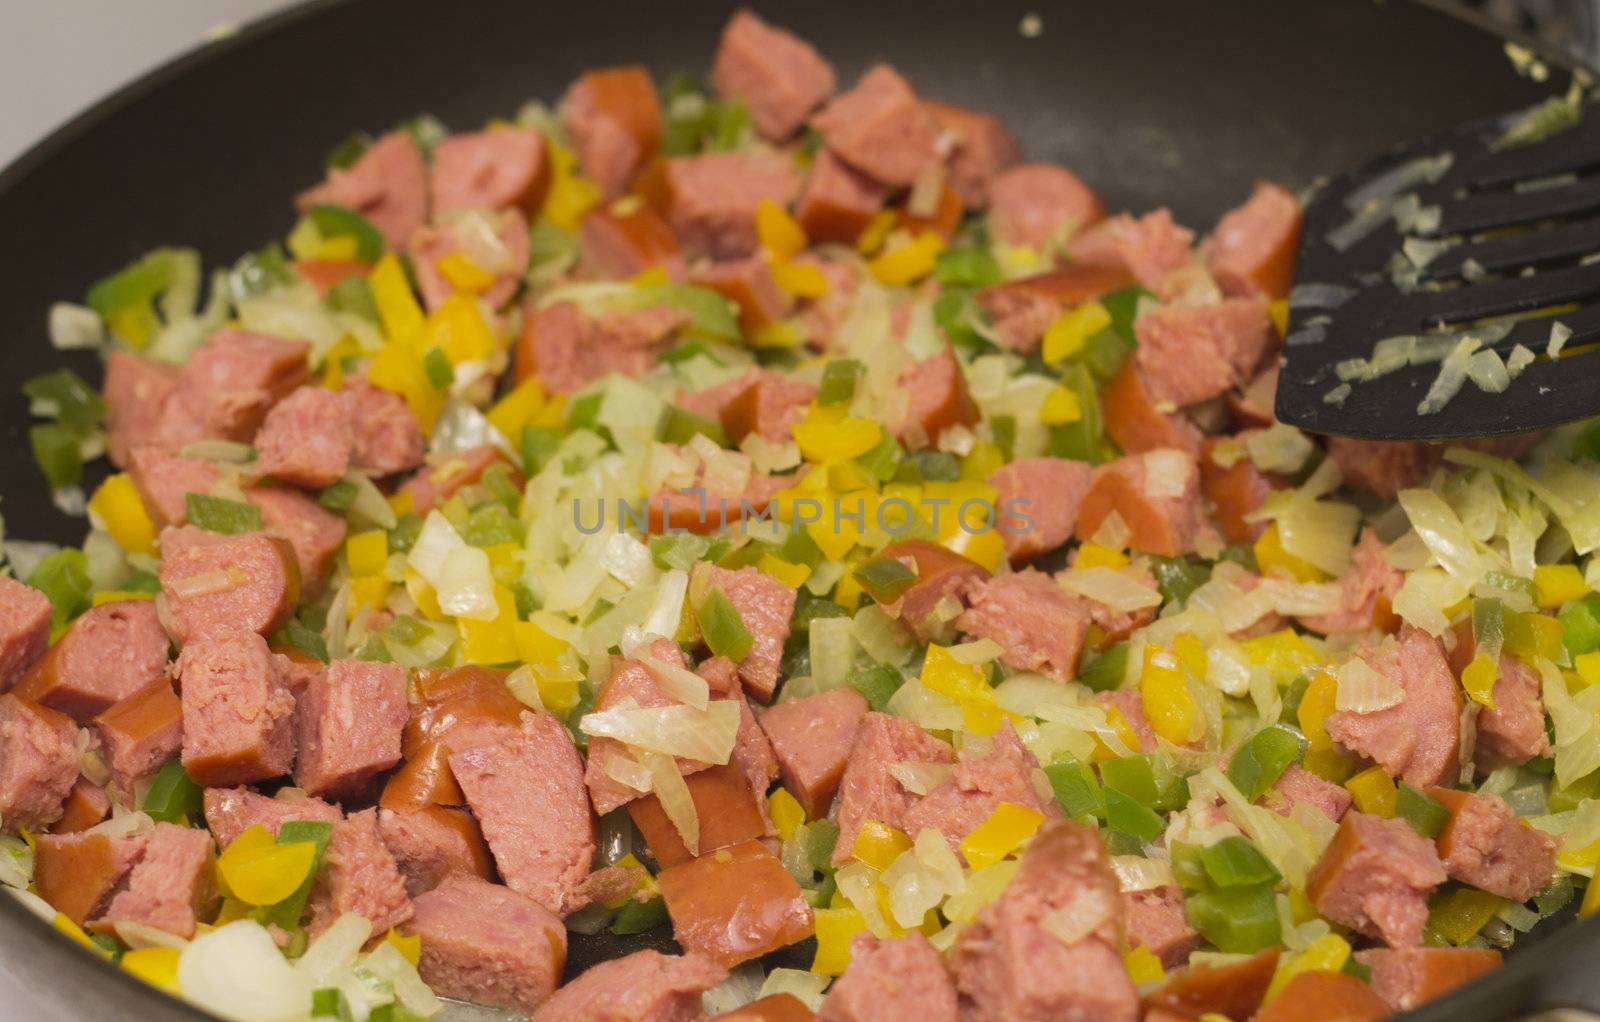 Sausage, Green and Yellow Chopped Peppers and onion by mrightmer